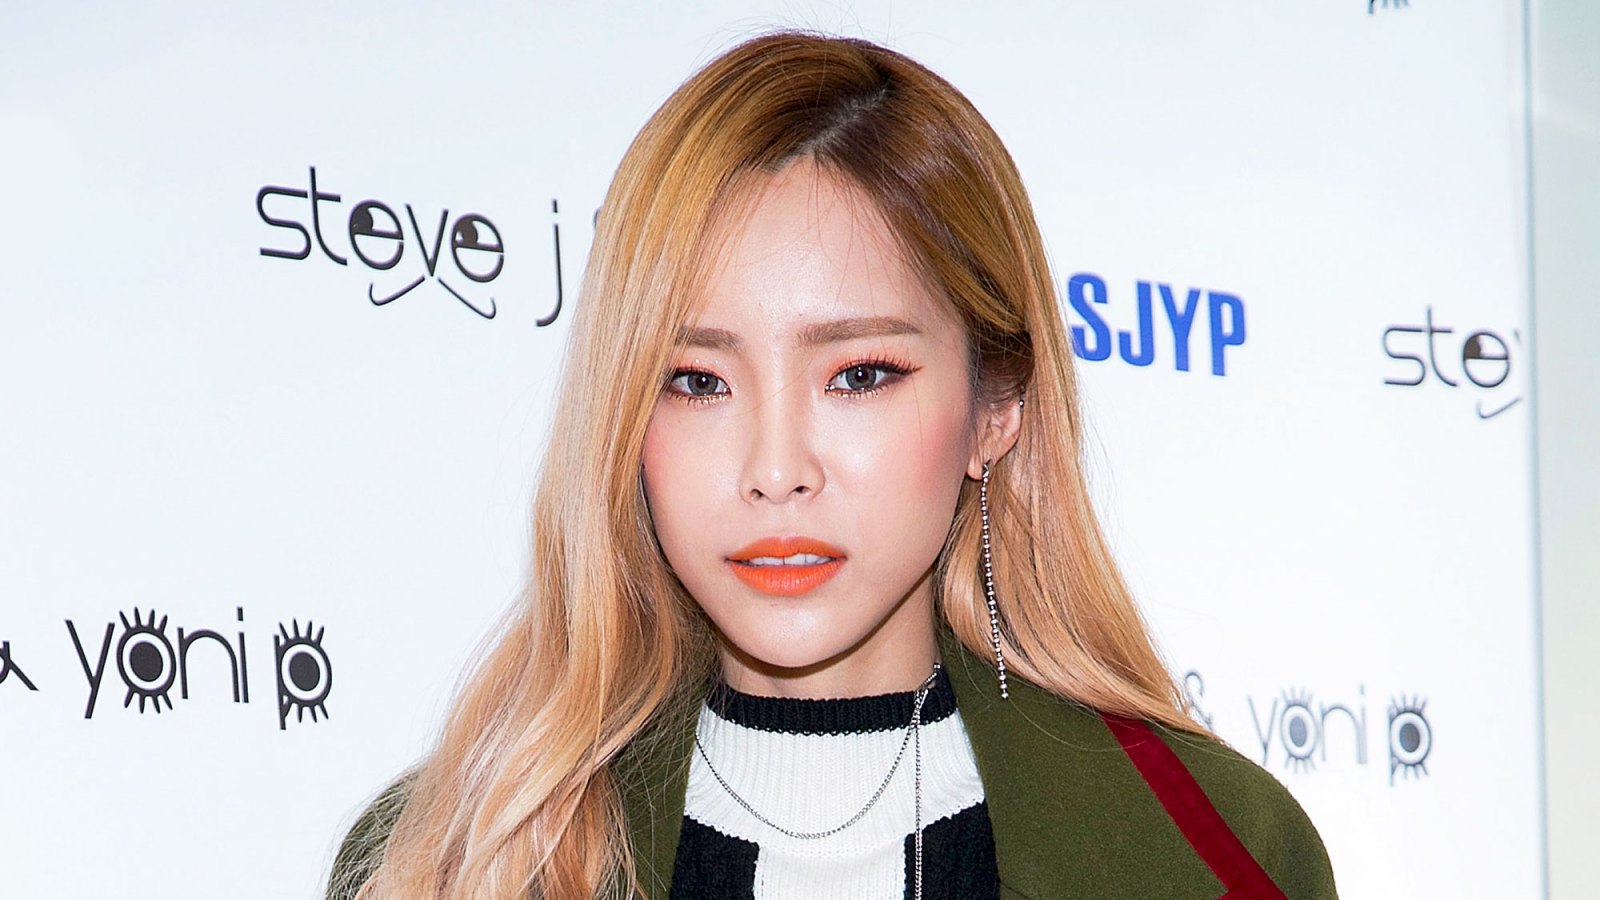 Heize attends the flagship store opening for "Steve J and Yoni P" in Seoul, South Korea.